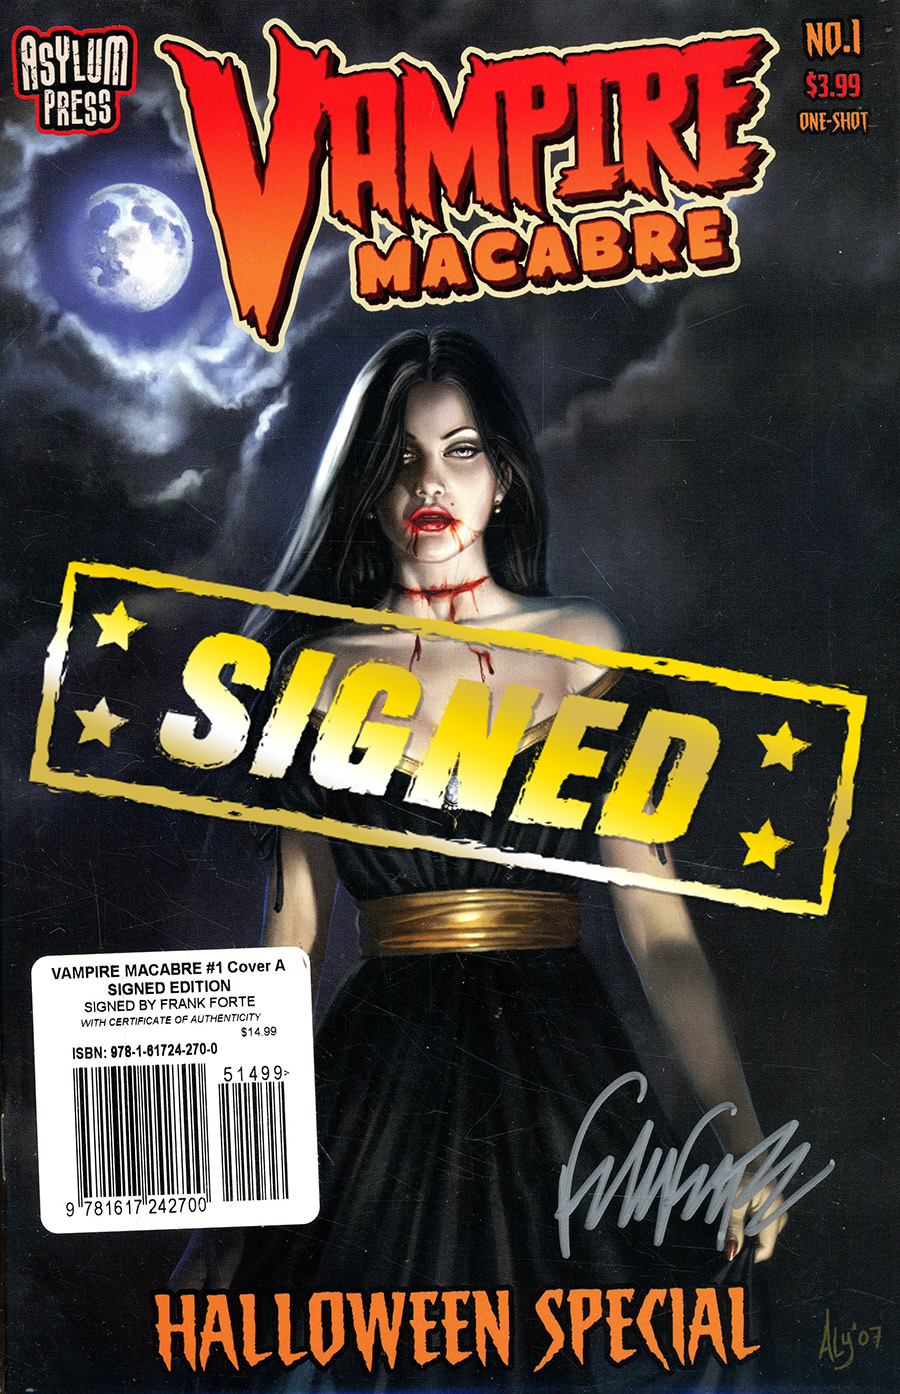 Vampire Macabre Halloween Special #1 (One Shot) Cover D Regular Aly Fell Cover Signed By Frank Forte